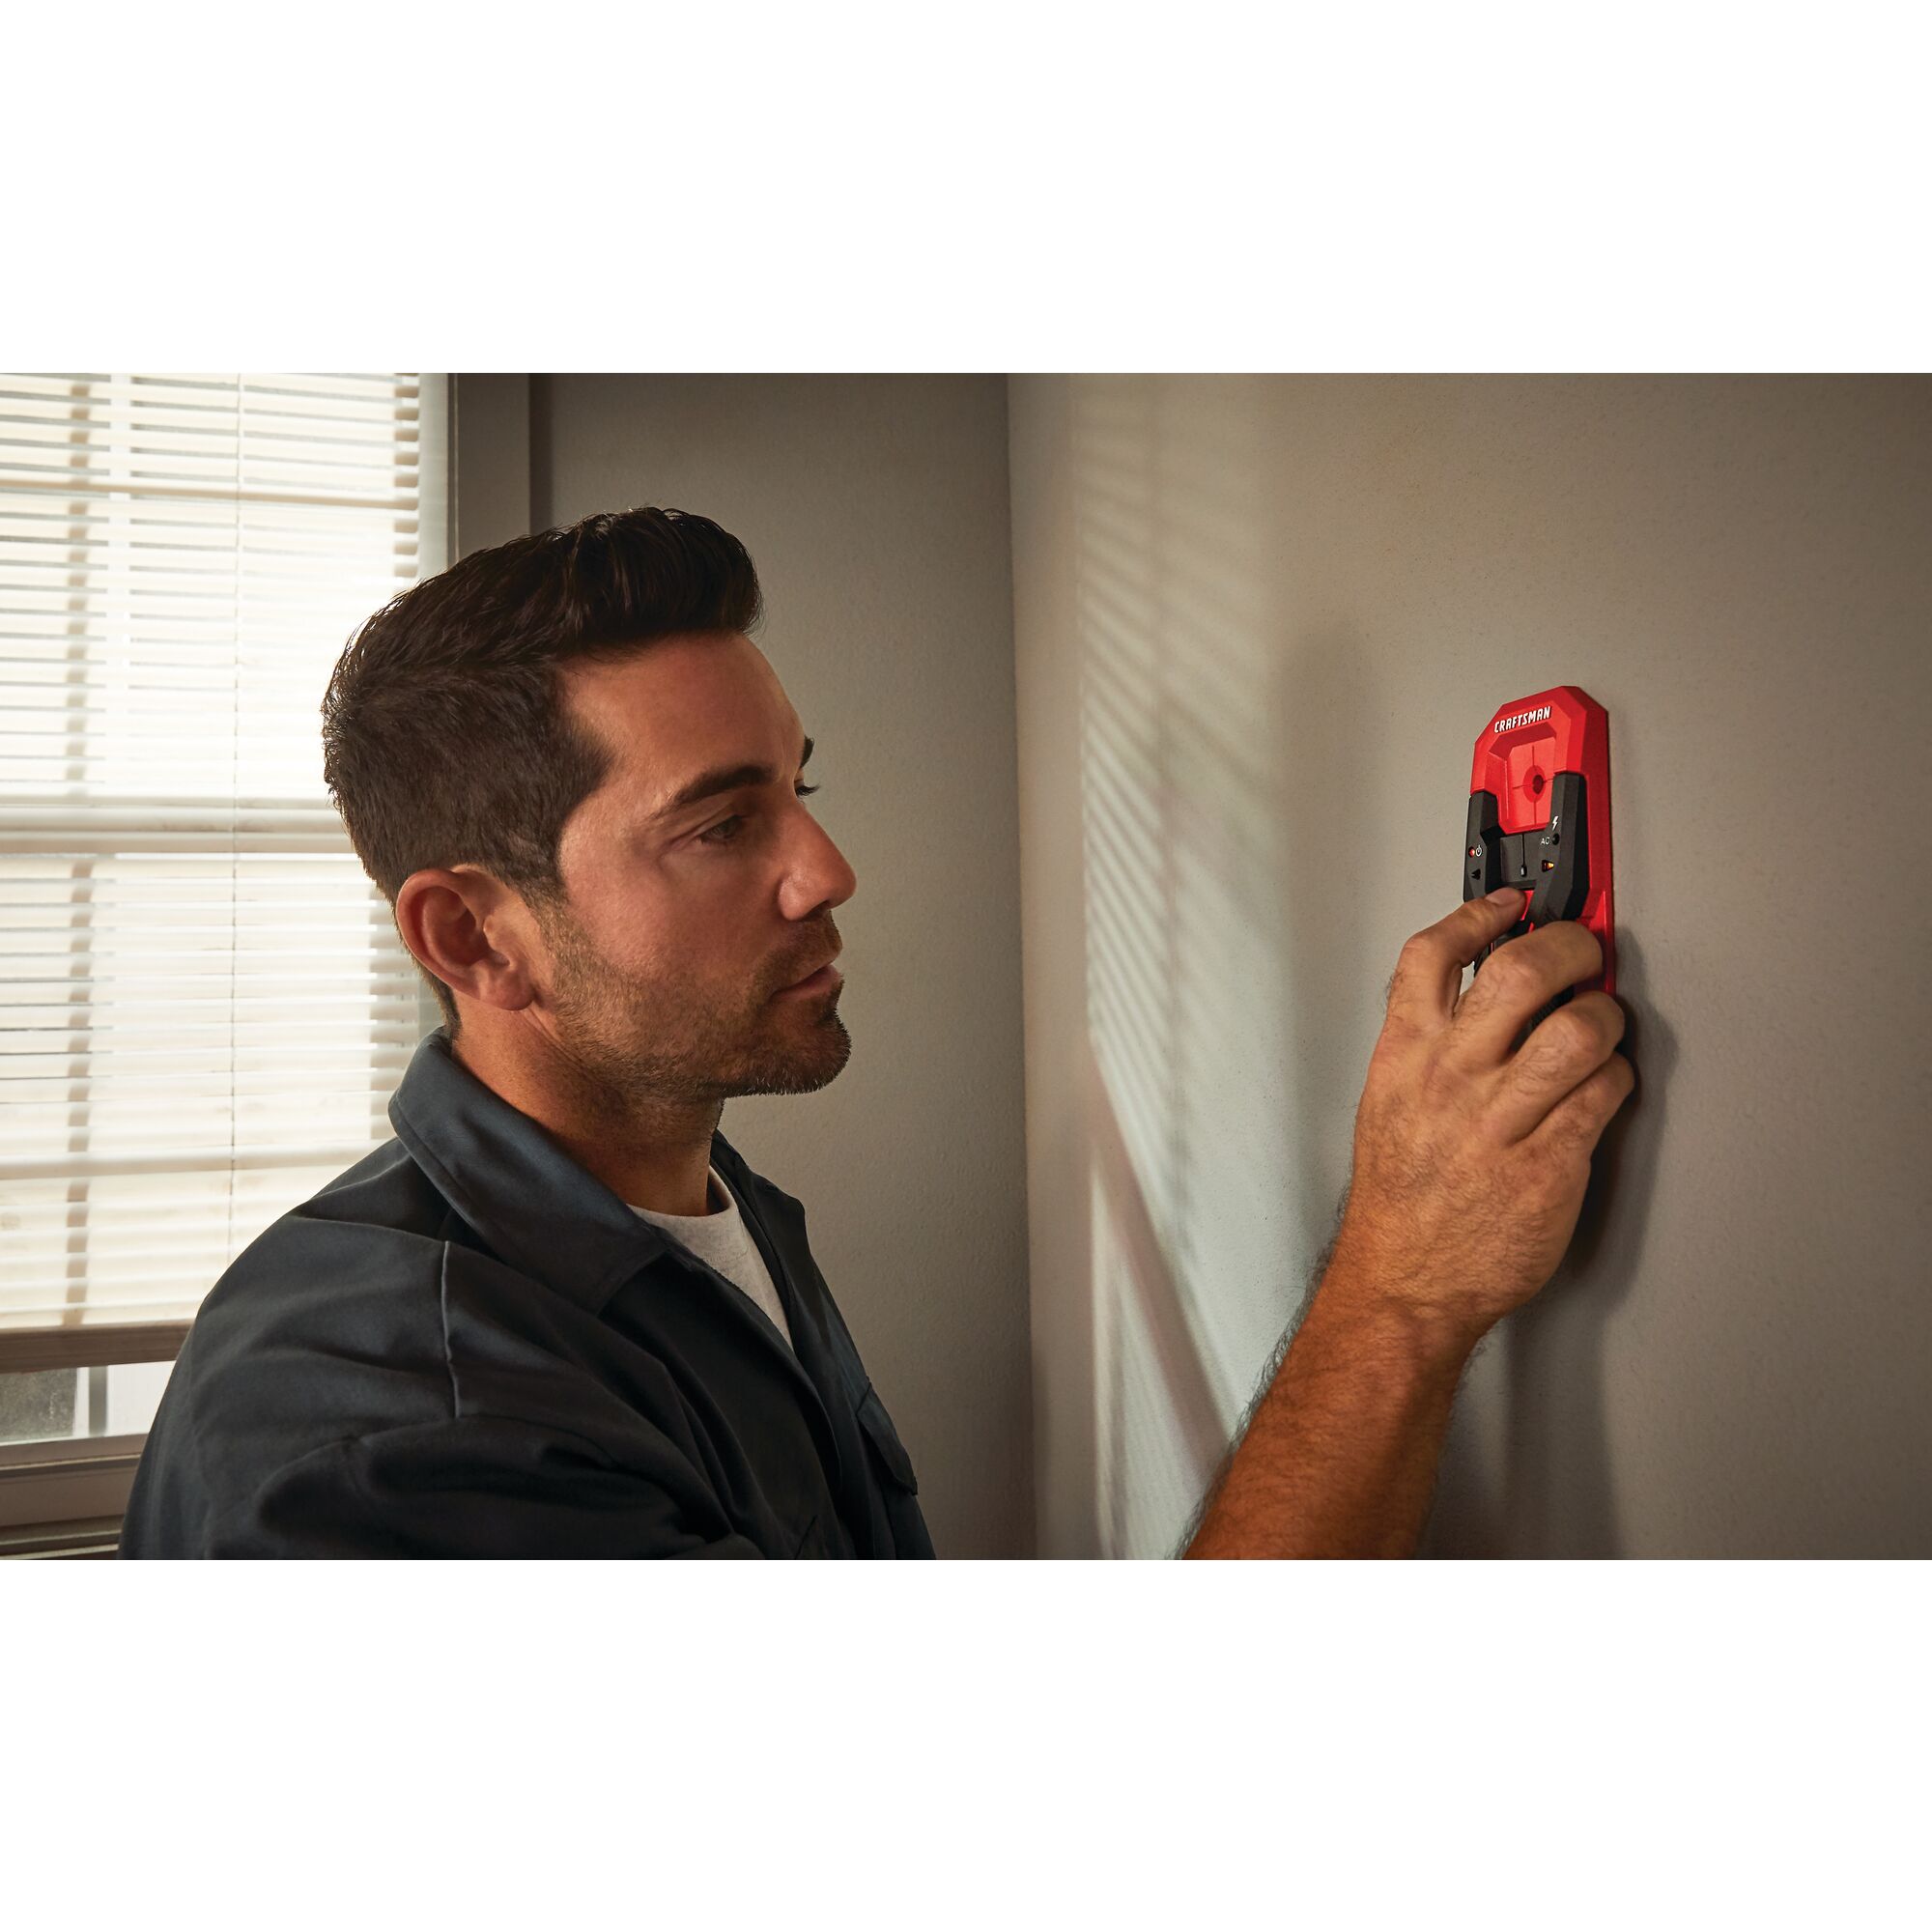 View of CRAFTSMAN Measuring: Stud Finders being used by consumer